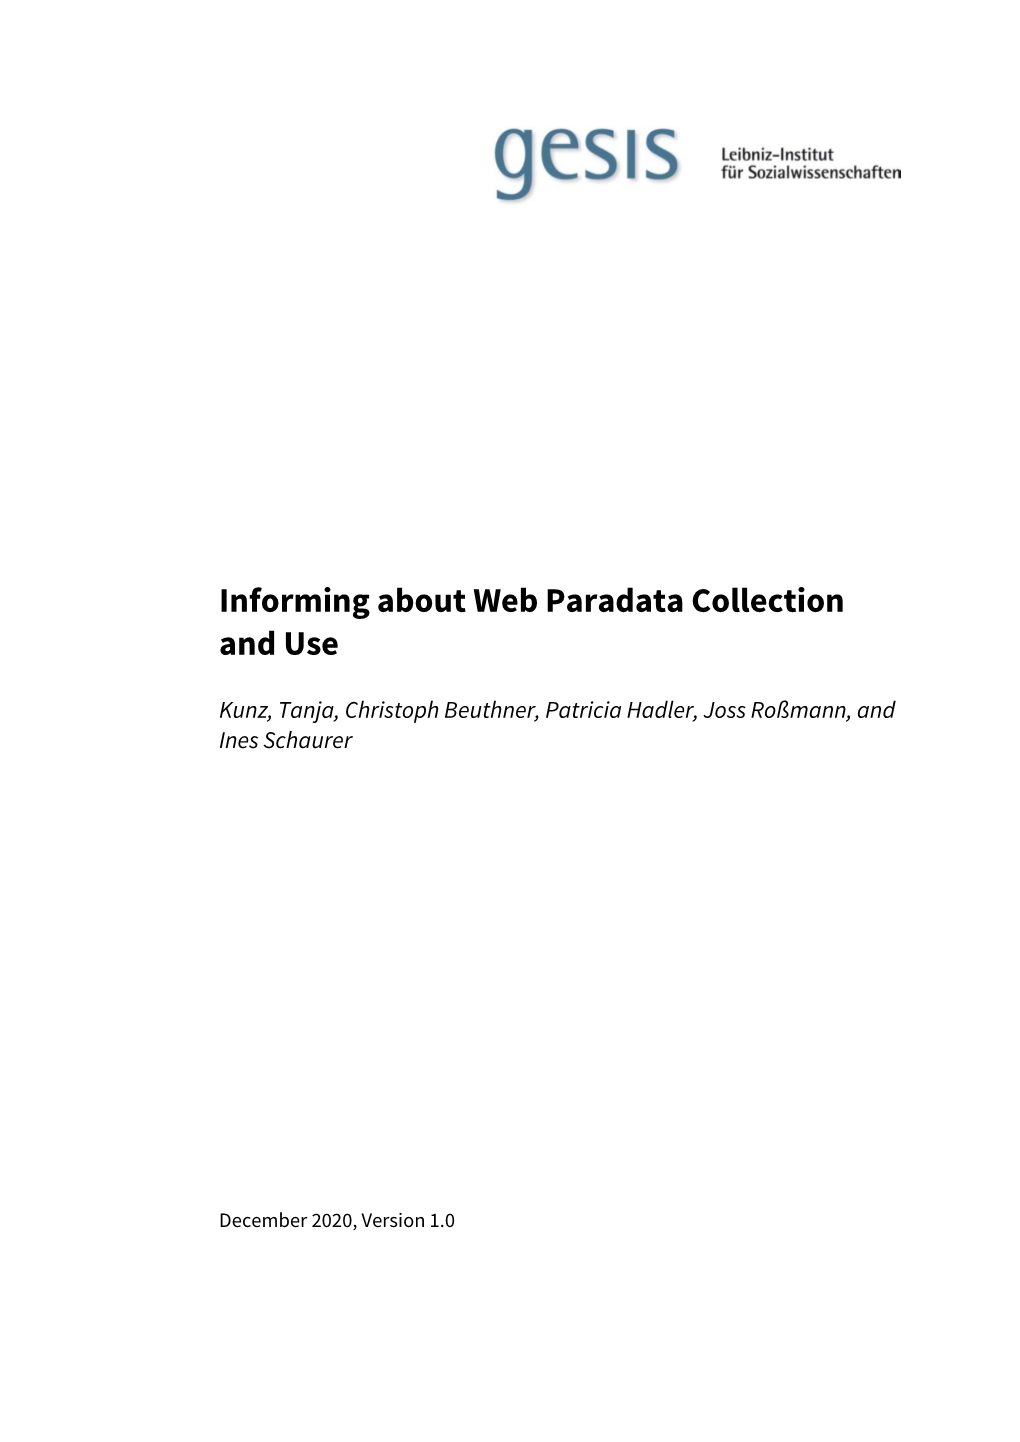 Informing About Web Paradata Collection and Use